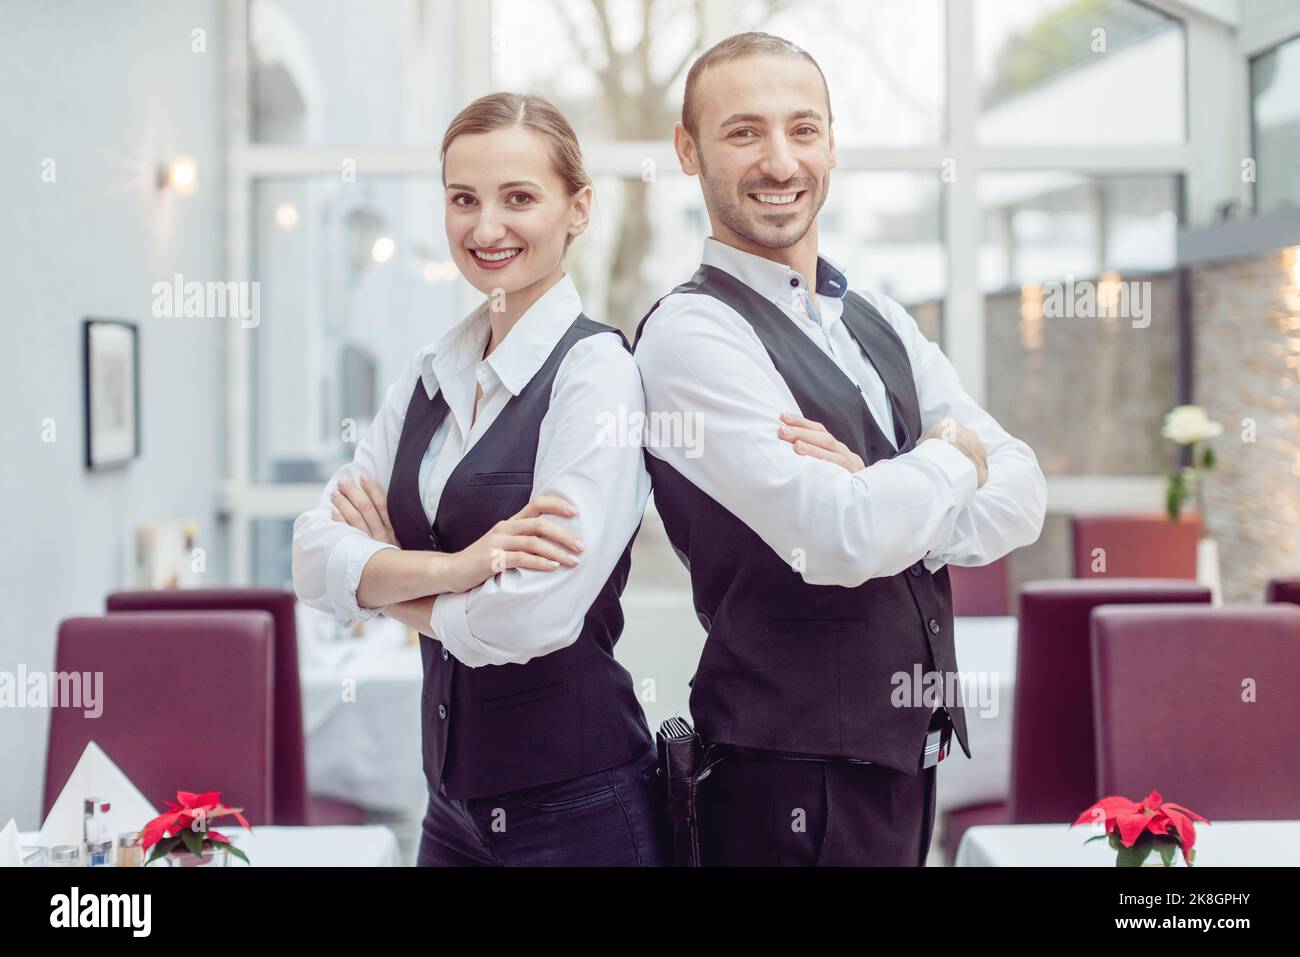 Team of woman and man waiter in a restaurant Stock Photo